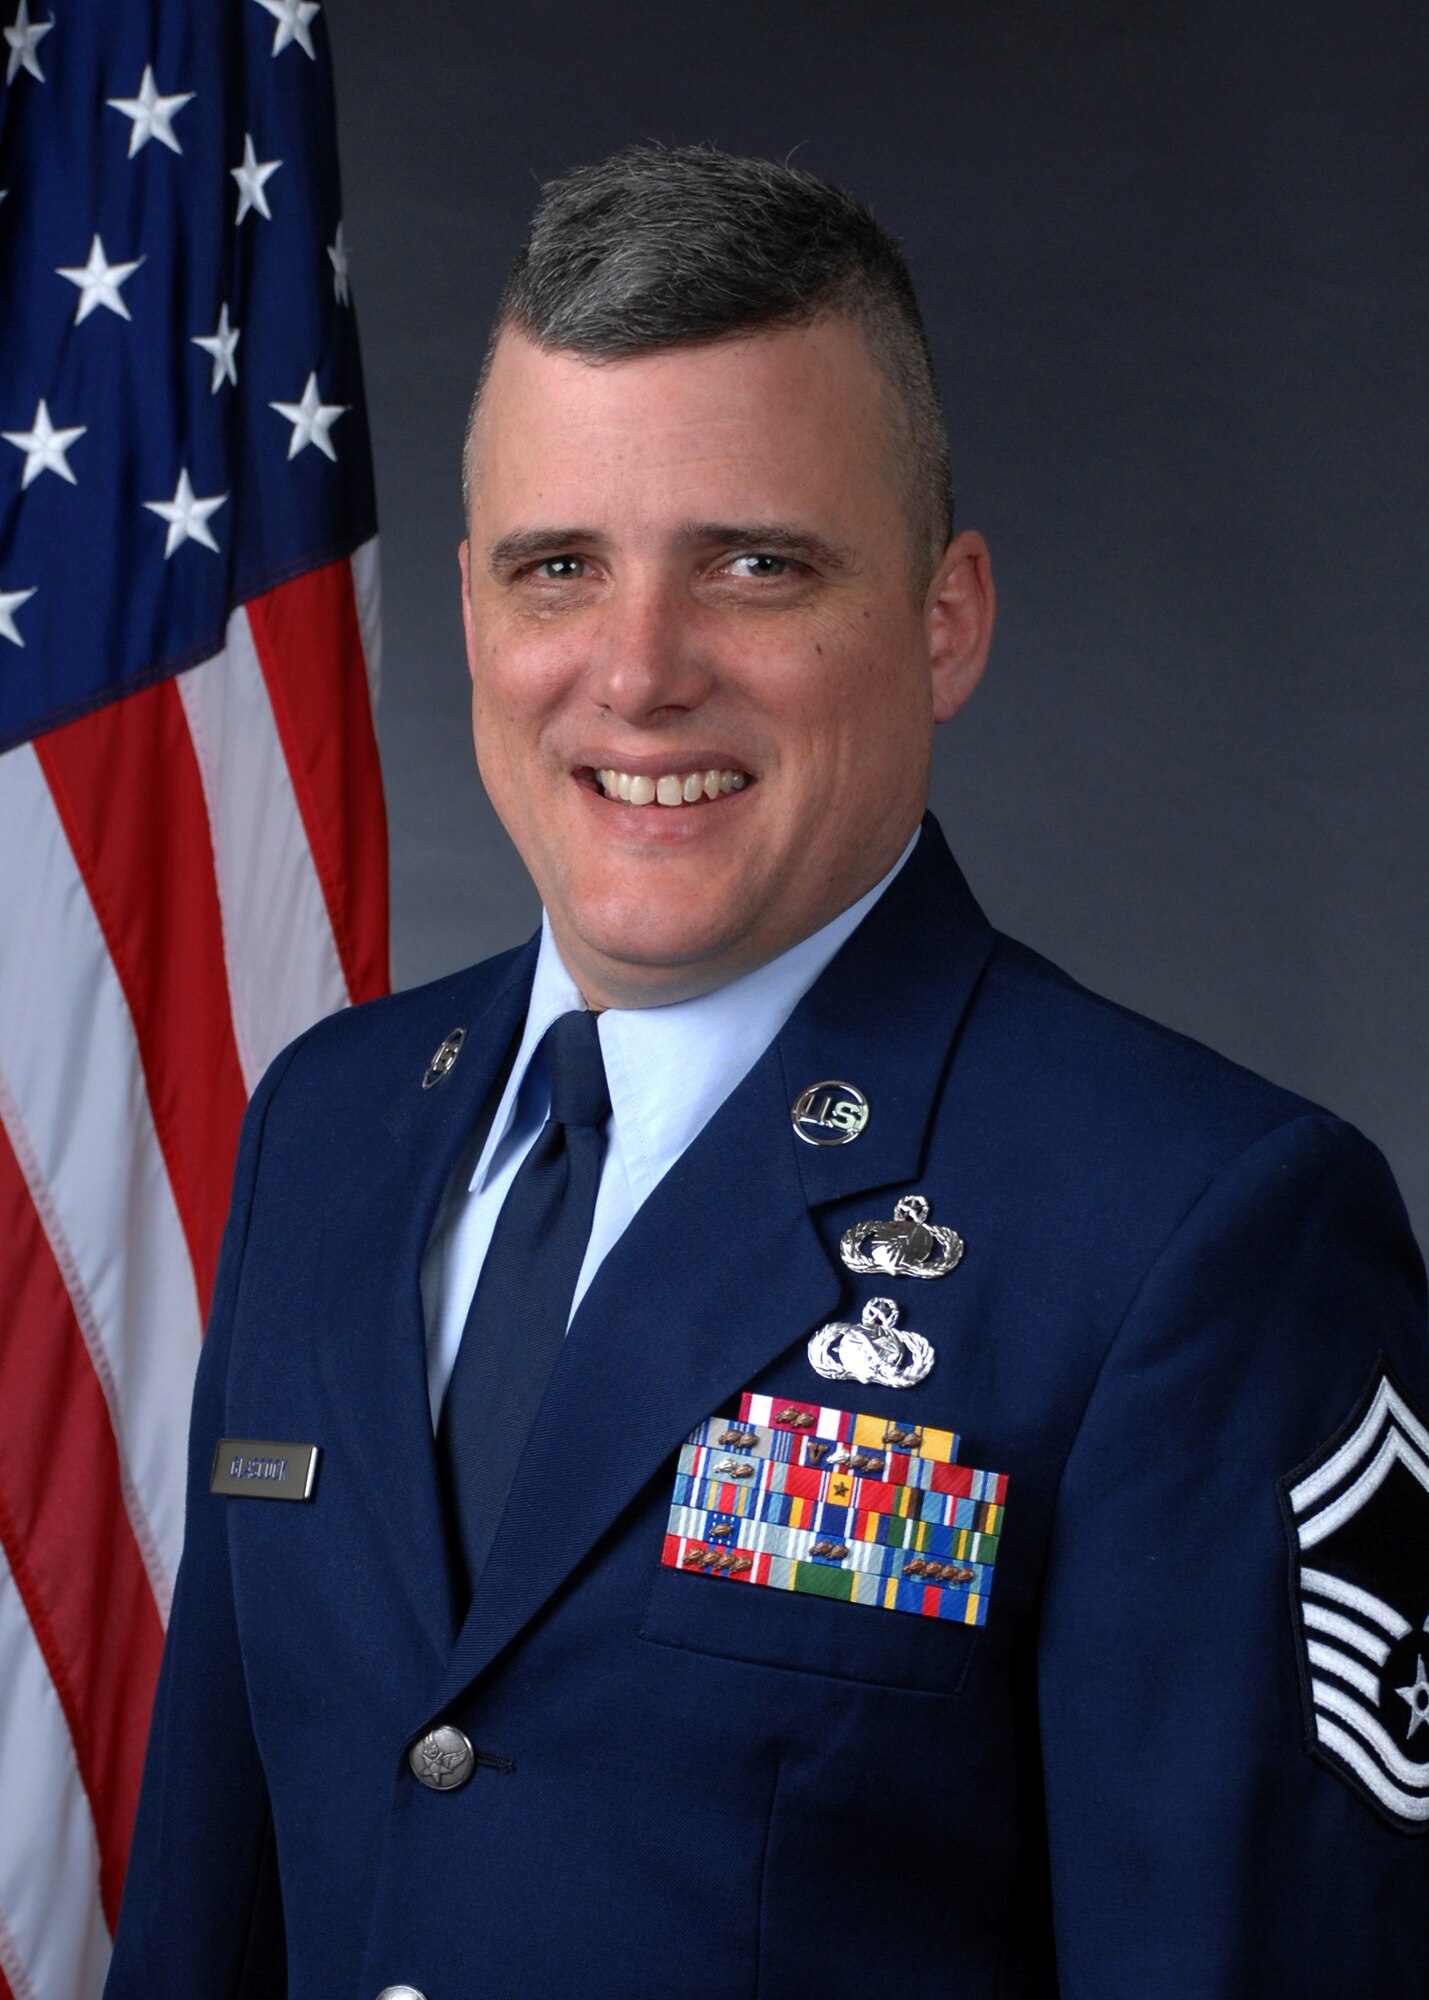 Senior Master Sgt. Chance Glascock, Superintendent of the 90th Comptroller Squadron at F.E. Warren Air Force Base, Wyo., was recognized as Senior NCO of the Year.